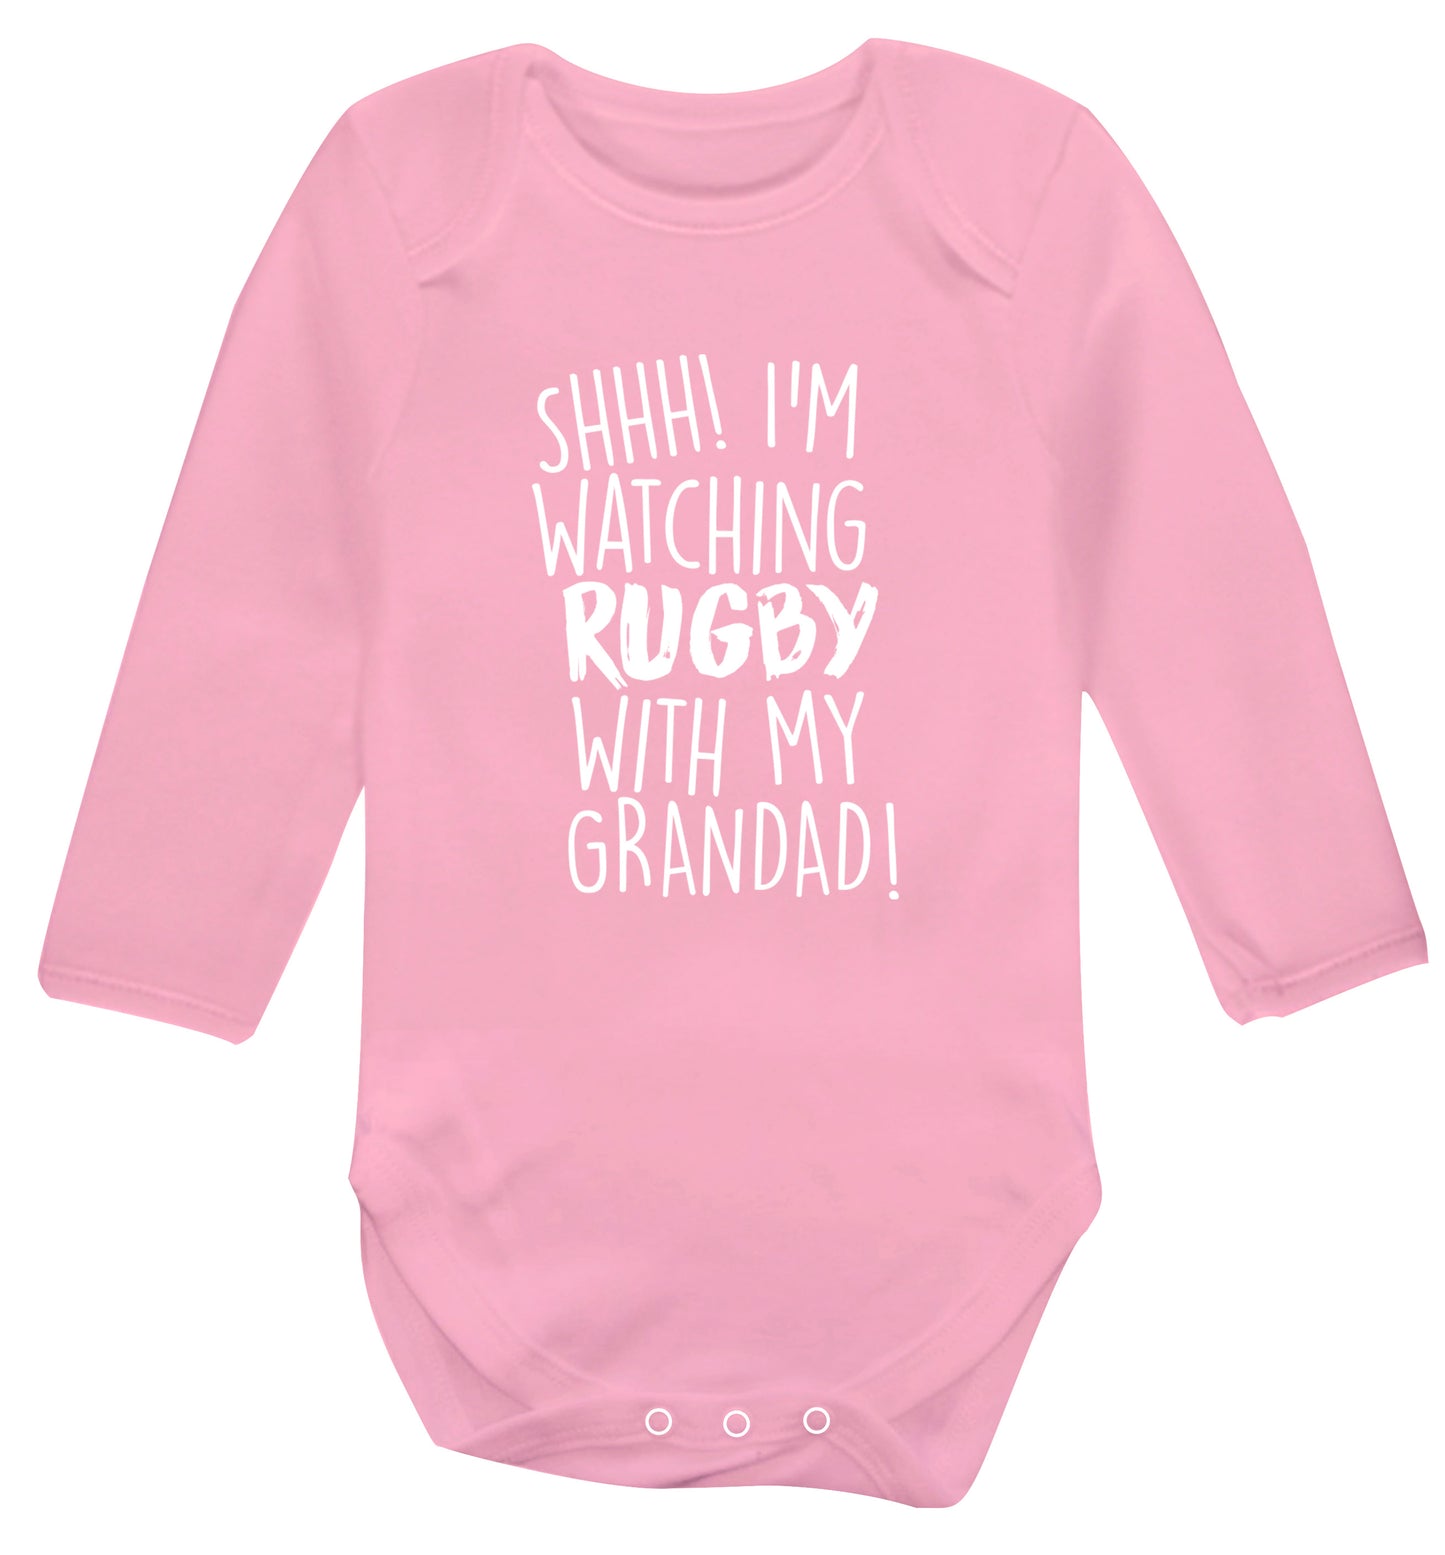 Shh I'm watching rugby with my grandaughter Baby Vest long sleeved pale pink 6-12 months